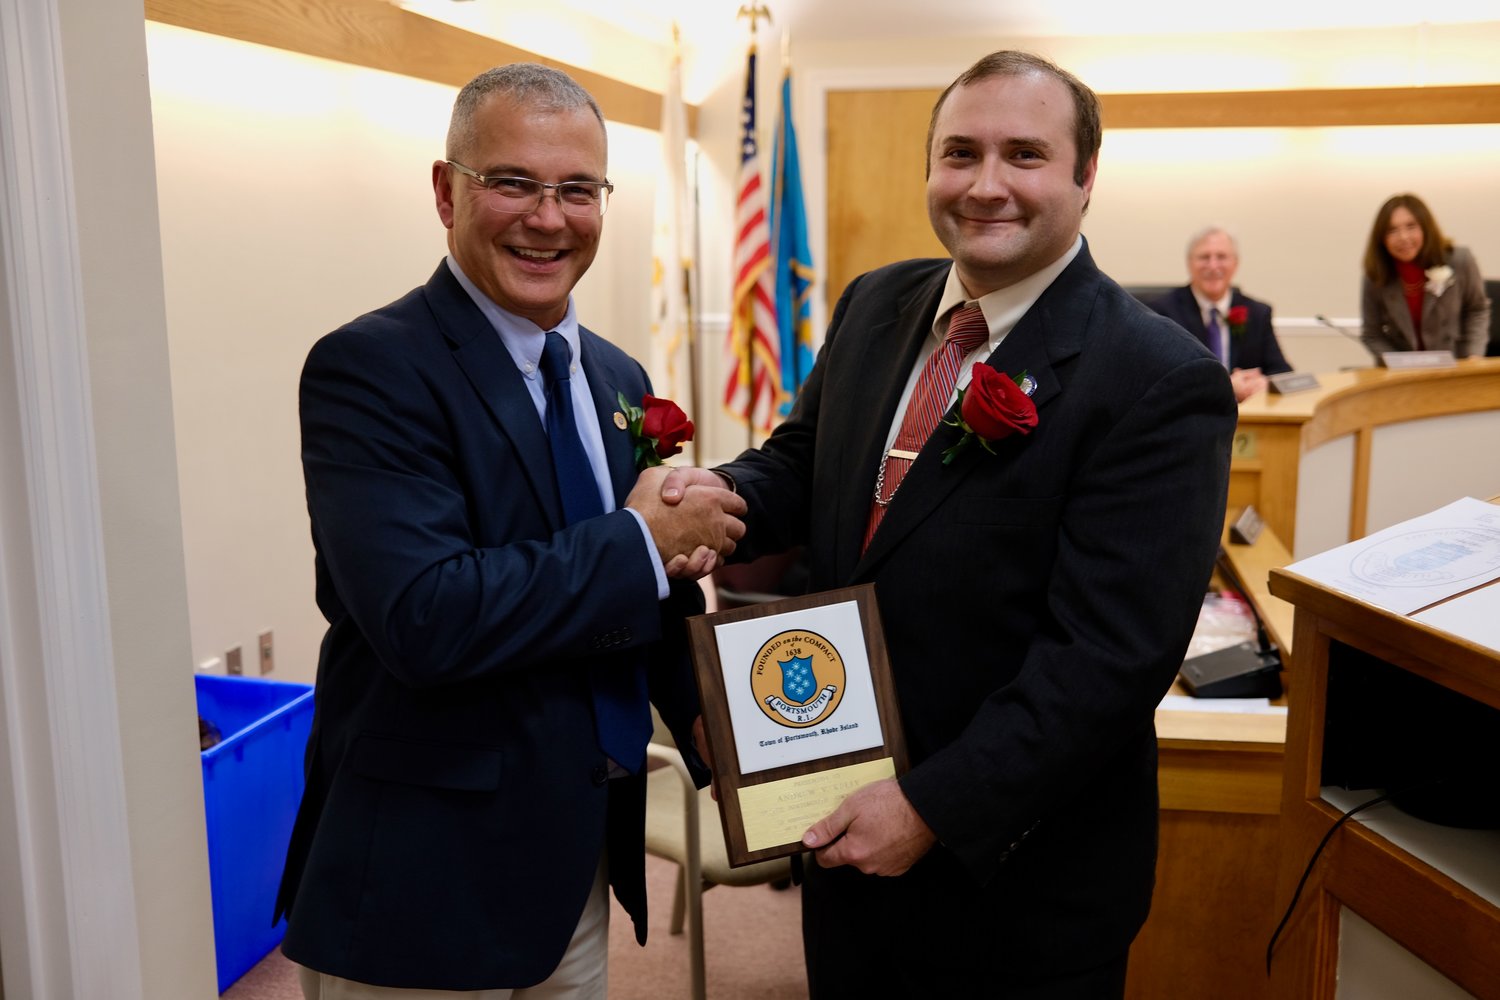 Town Council President Kevin Aguiar (left) presents a town tile to outgoing member Andrew Kelly.